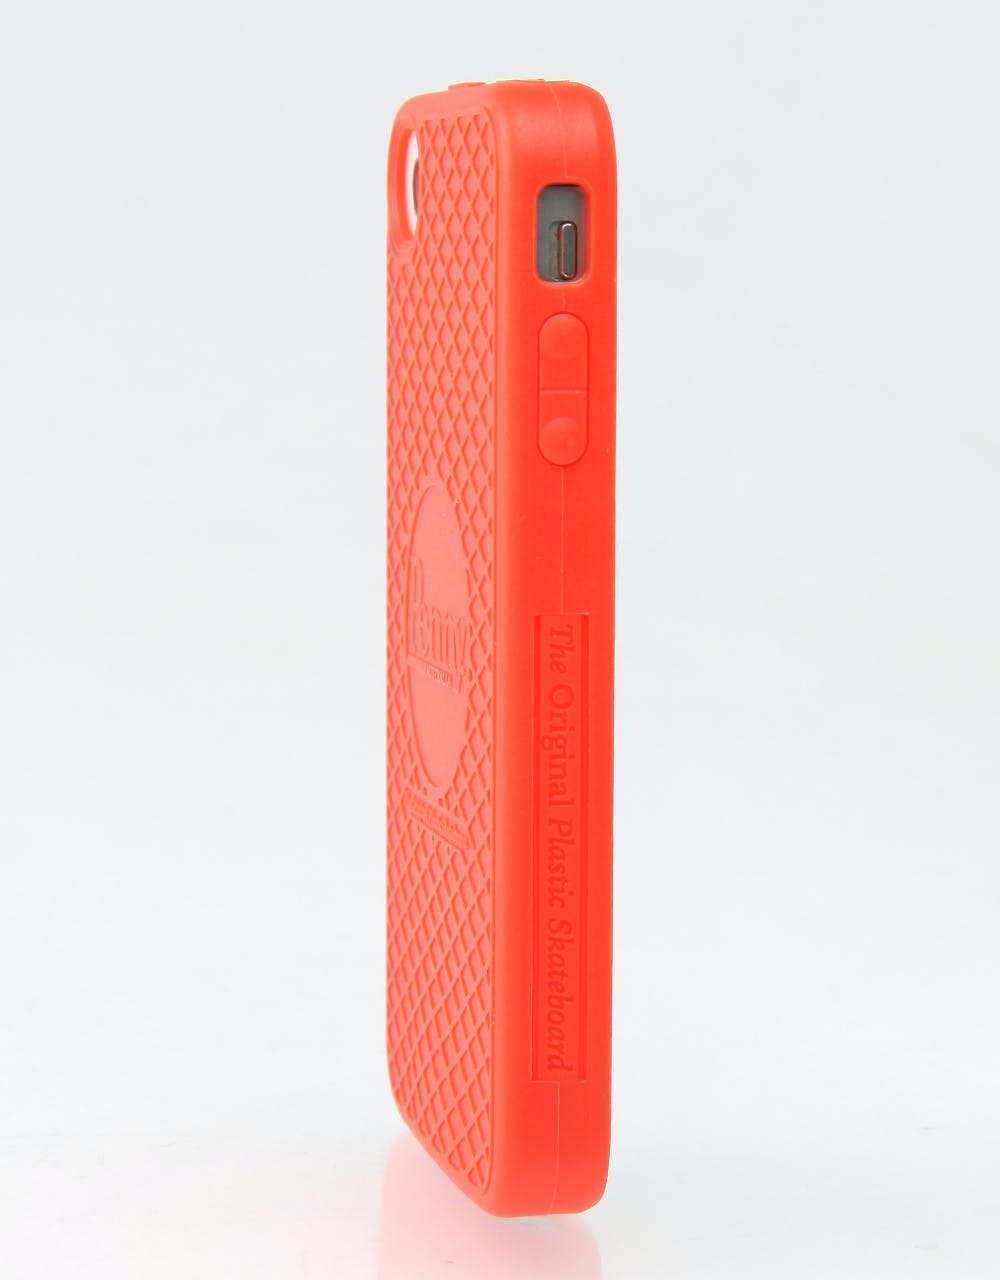 Penny iPhone 4/4s Case